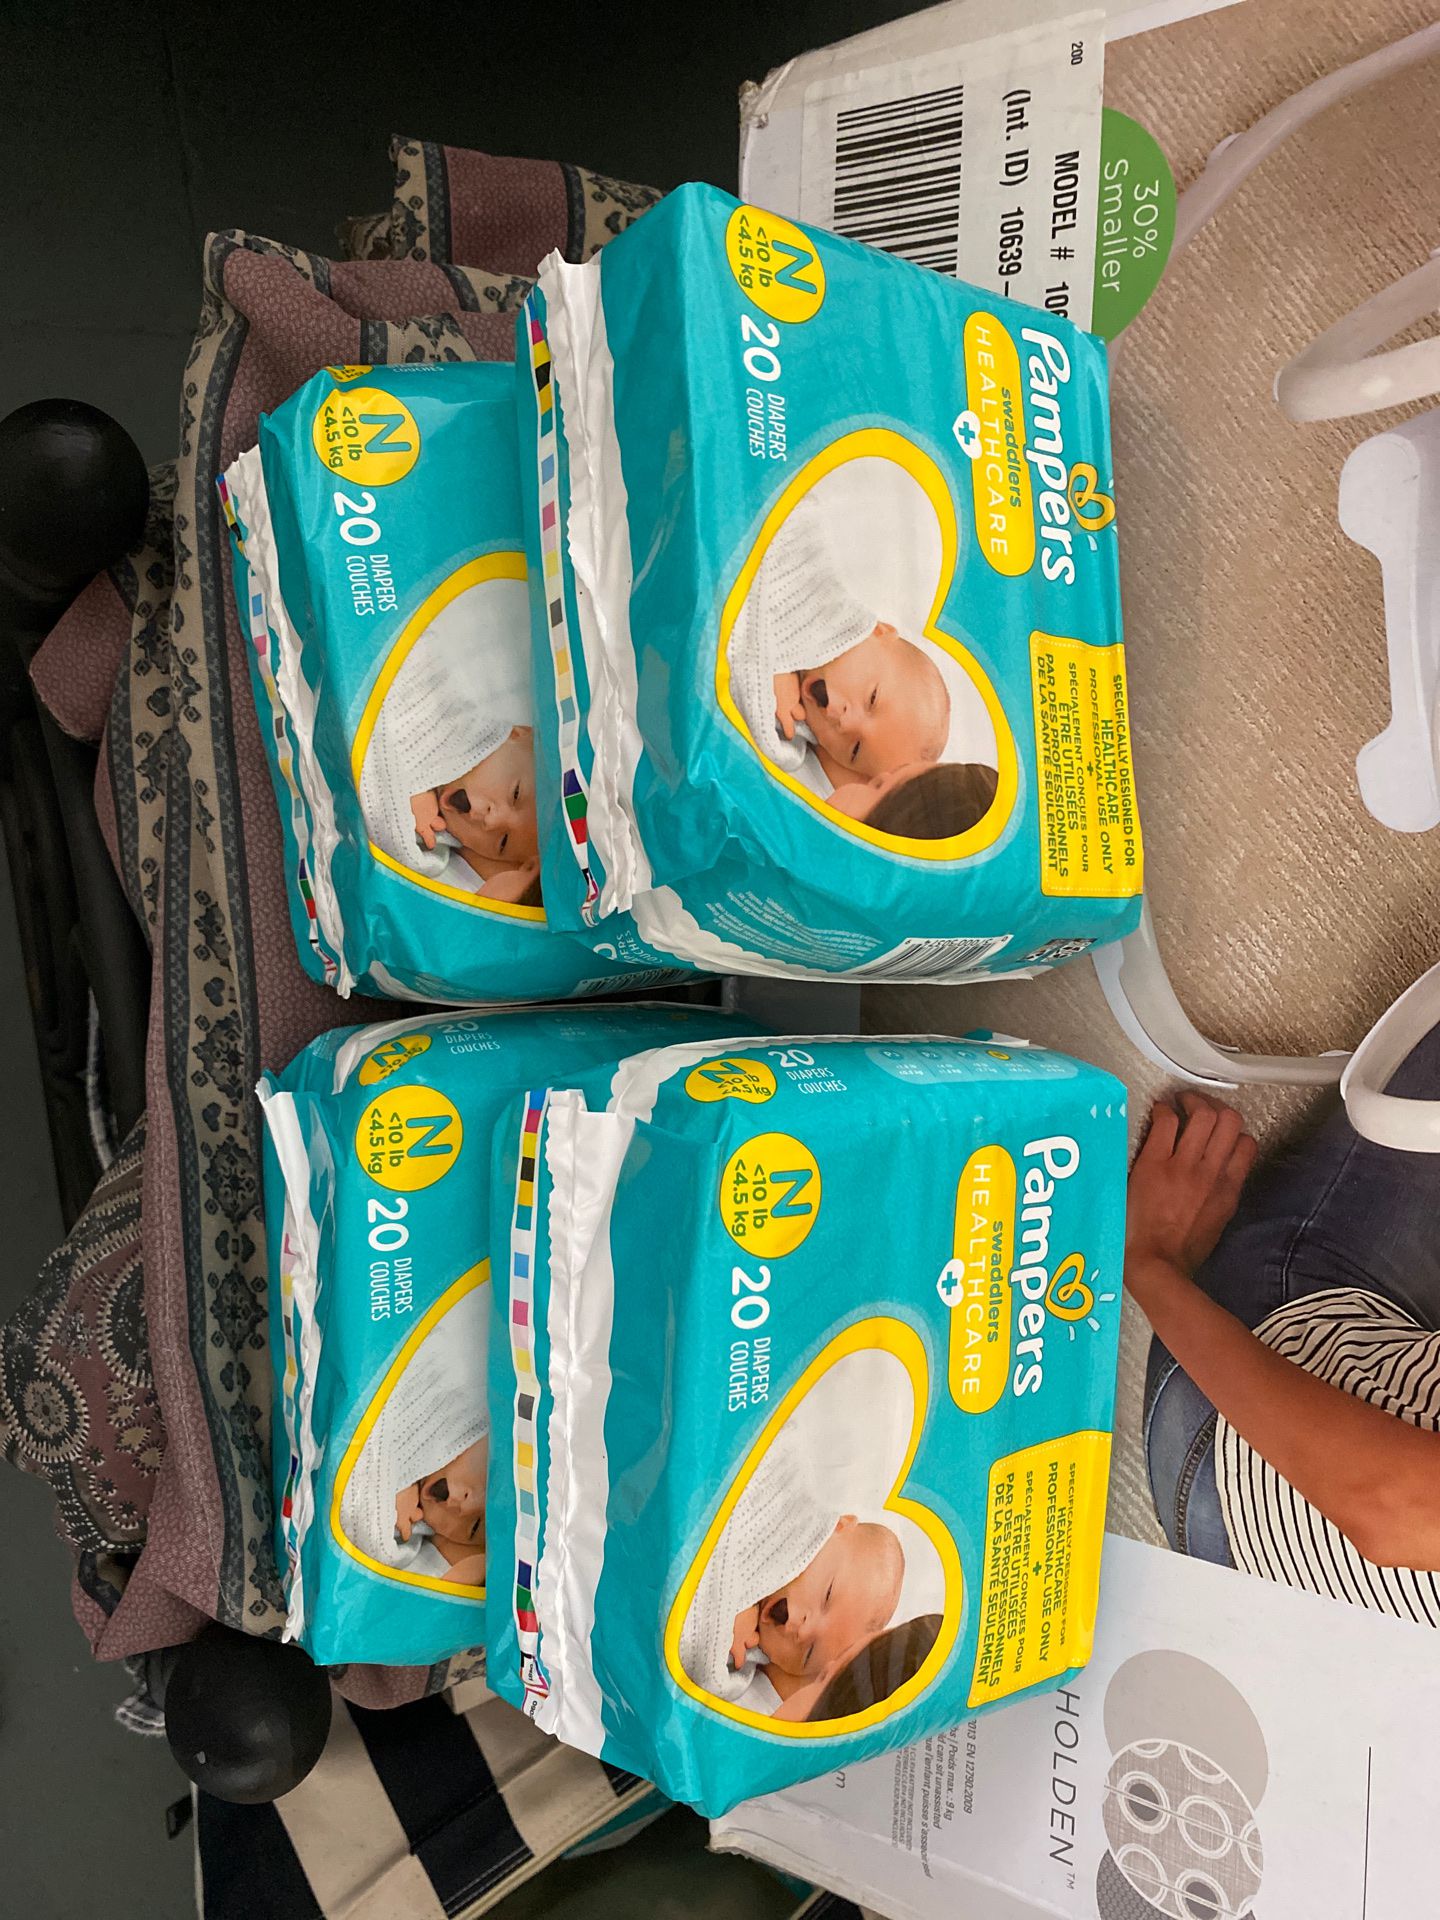 Newborn pampers 10 packs of 20 available